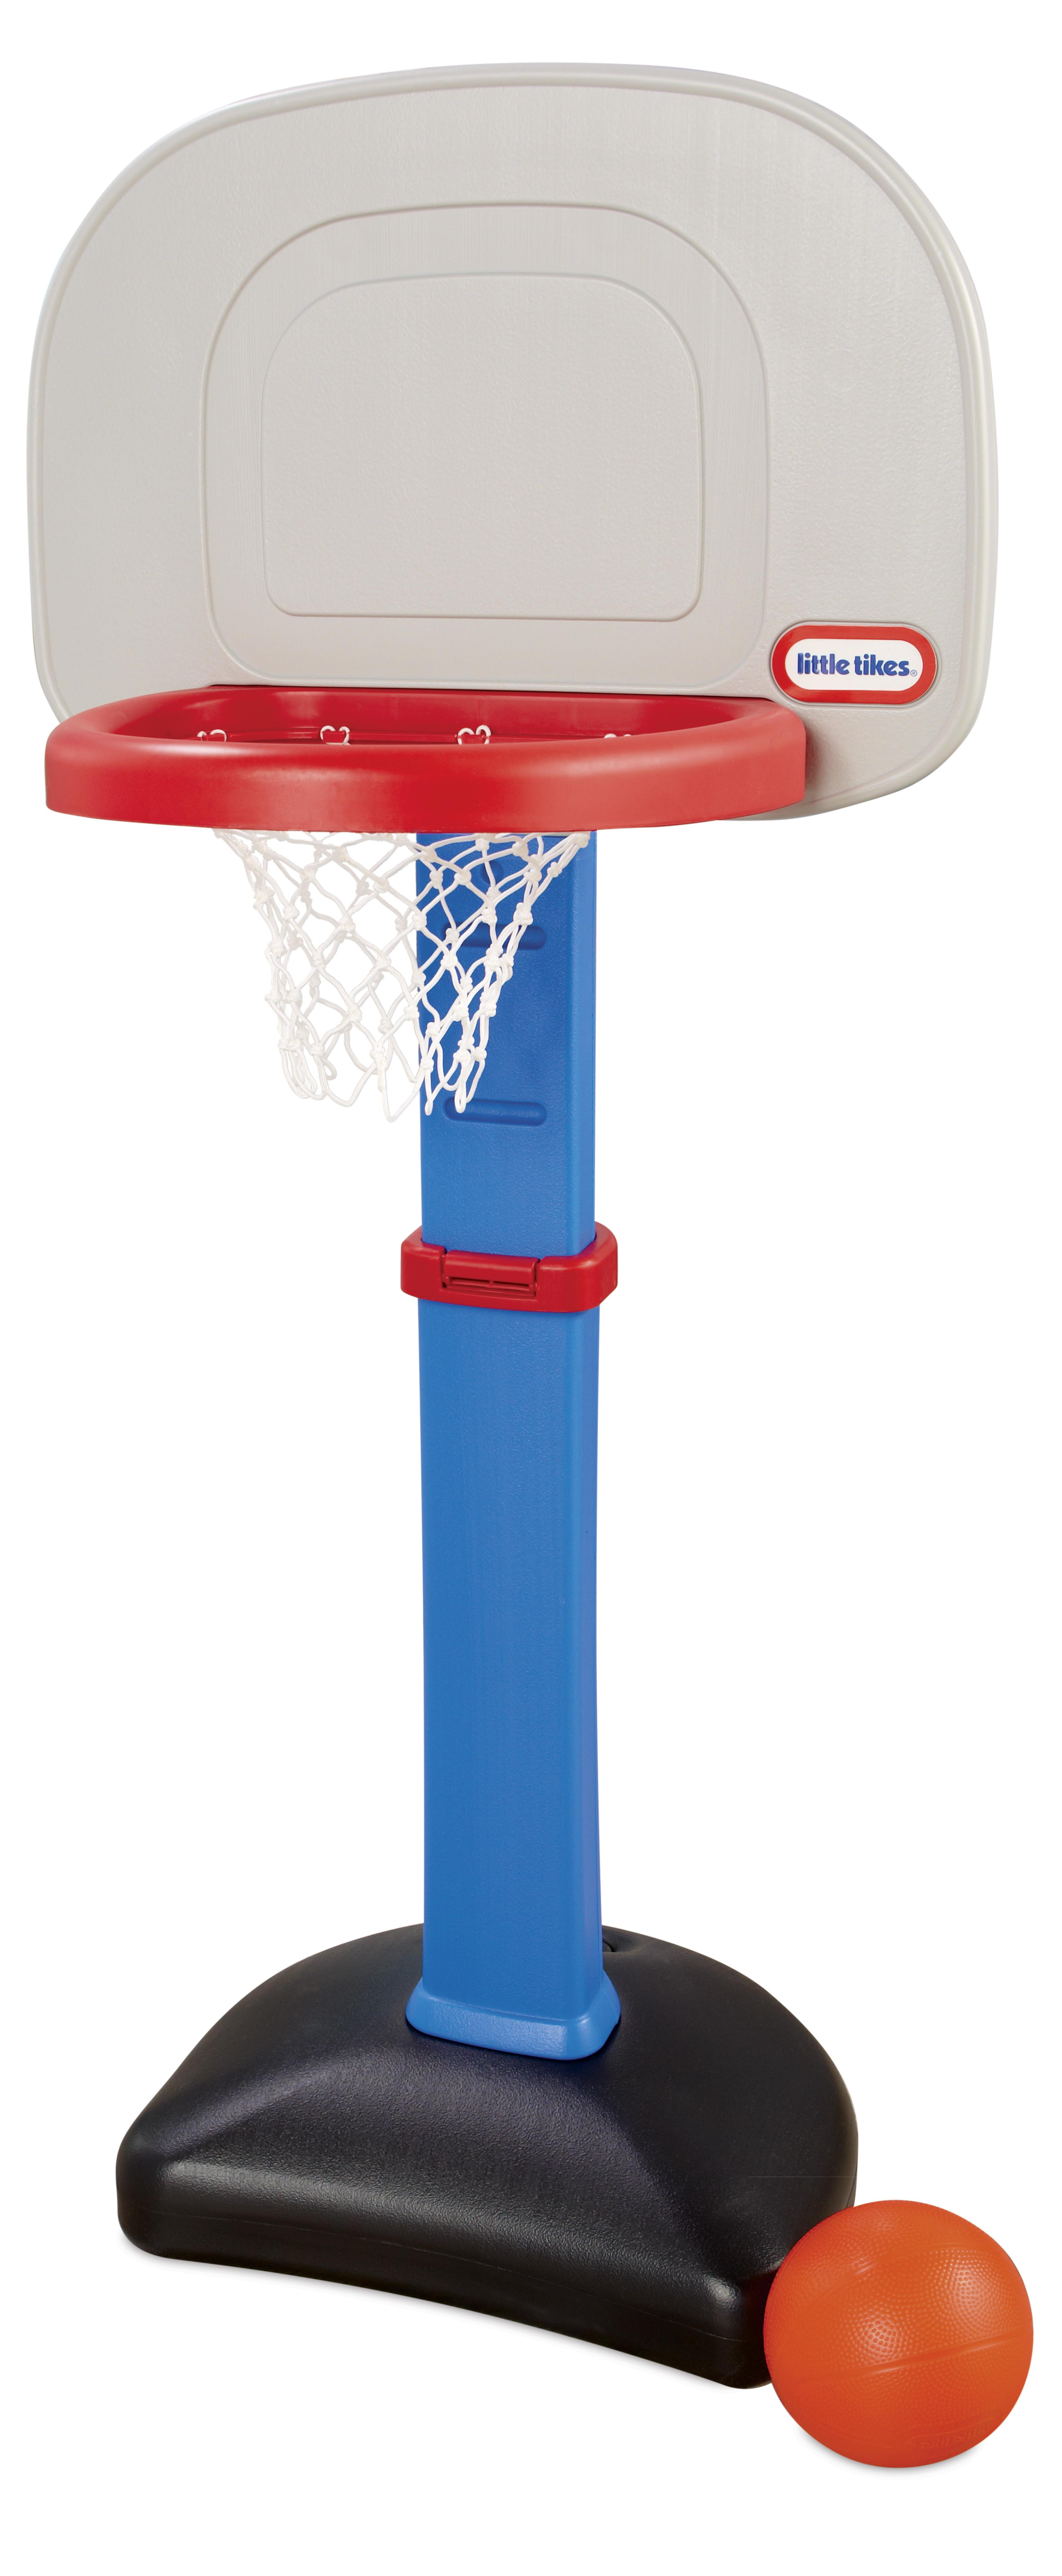 Little Tikes TotSports Easy Score Toy Basketball Hoop with Ball, Height Adjustable, Indoor Outdoor Backyard Toy Sports Play Set For Kids Girls Boys Ages 18 months to 5 Year Old, Blue - 2